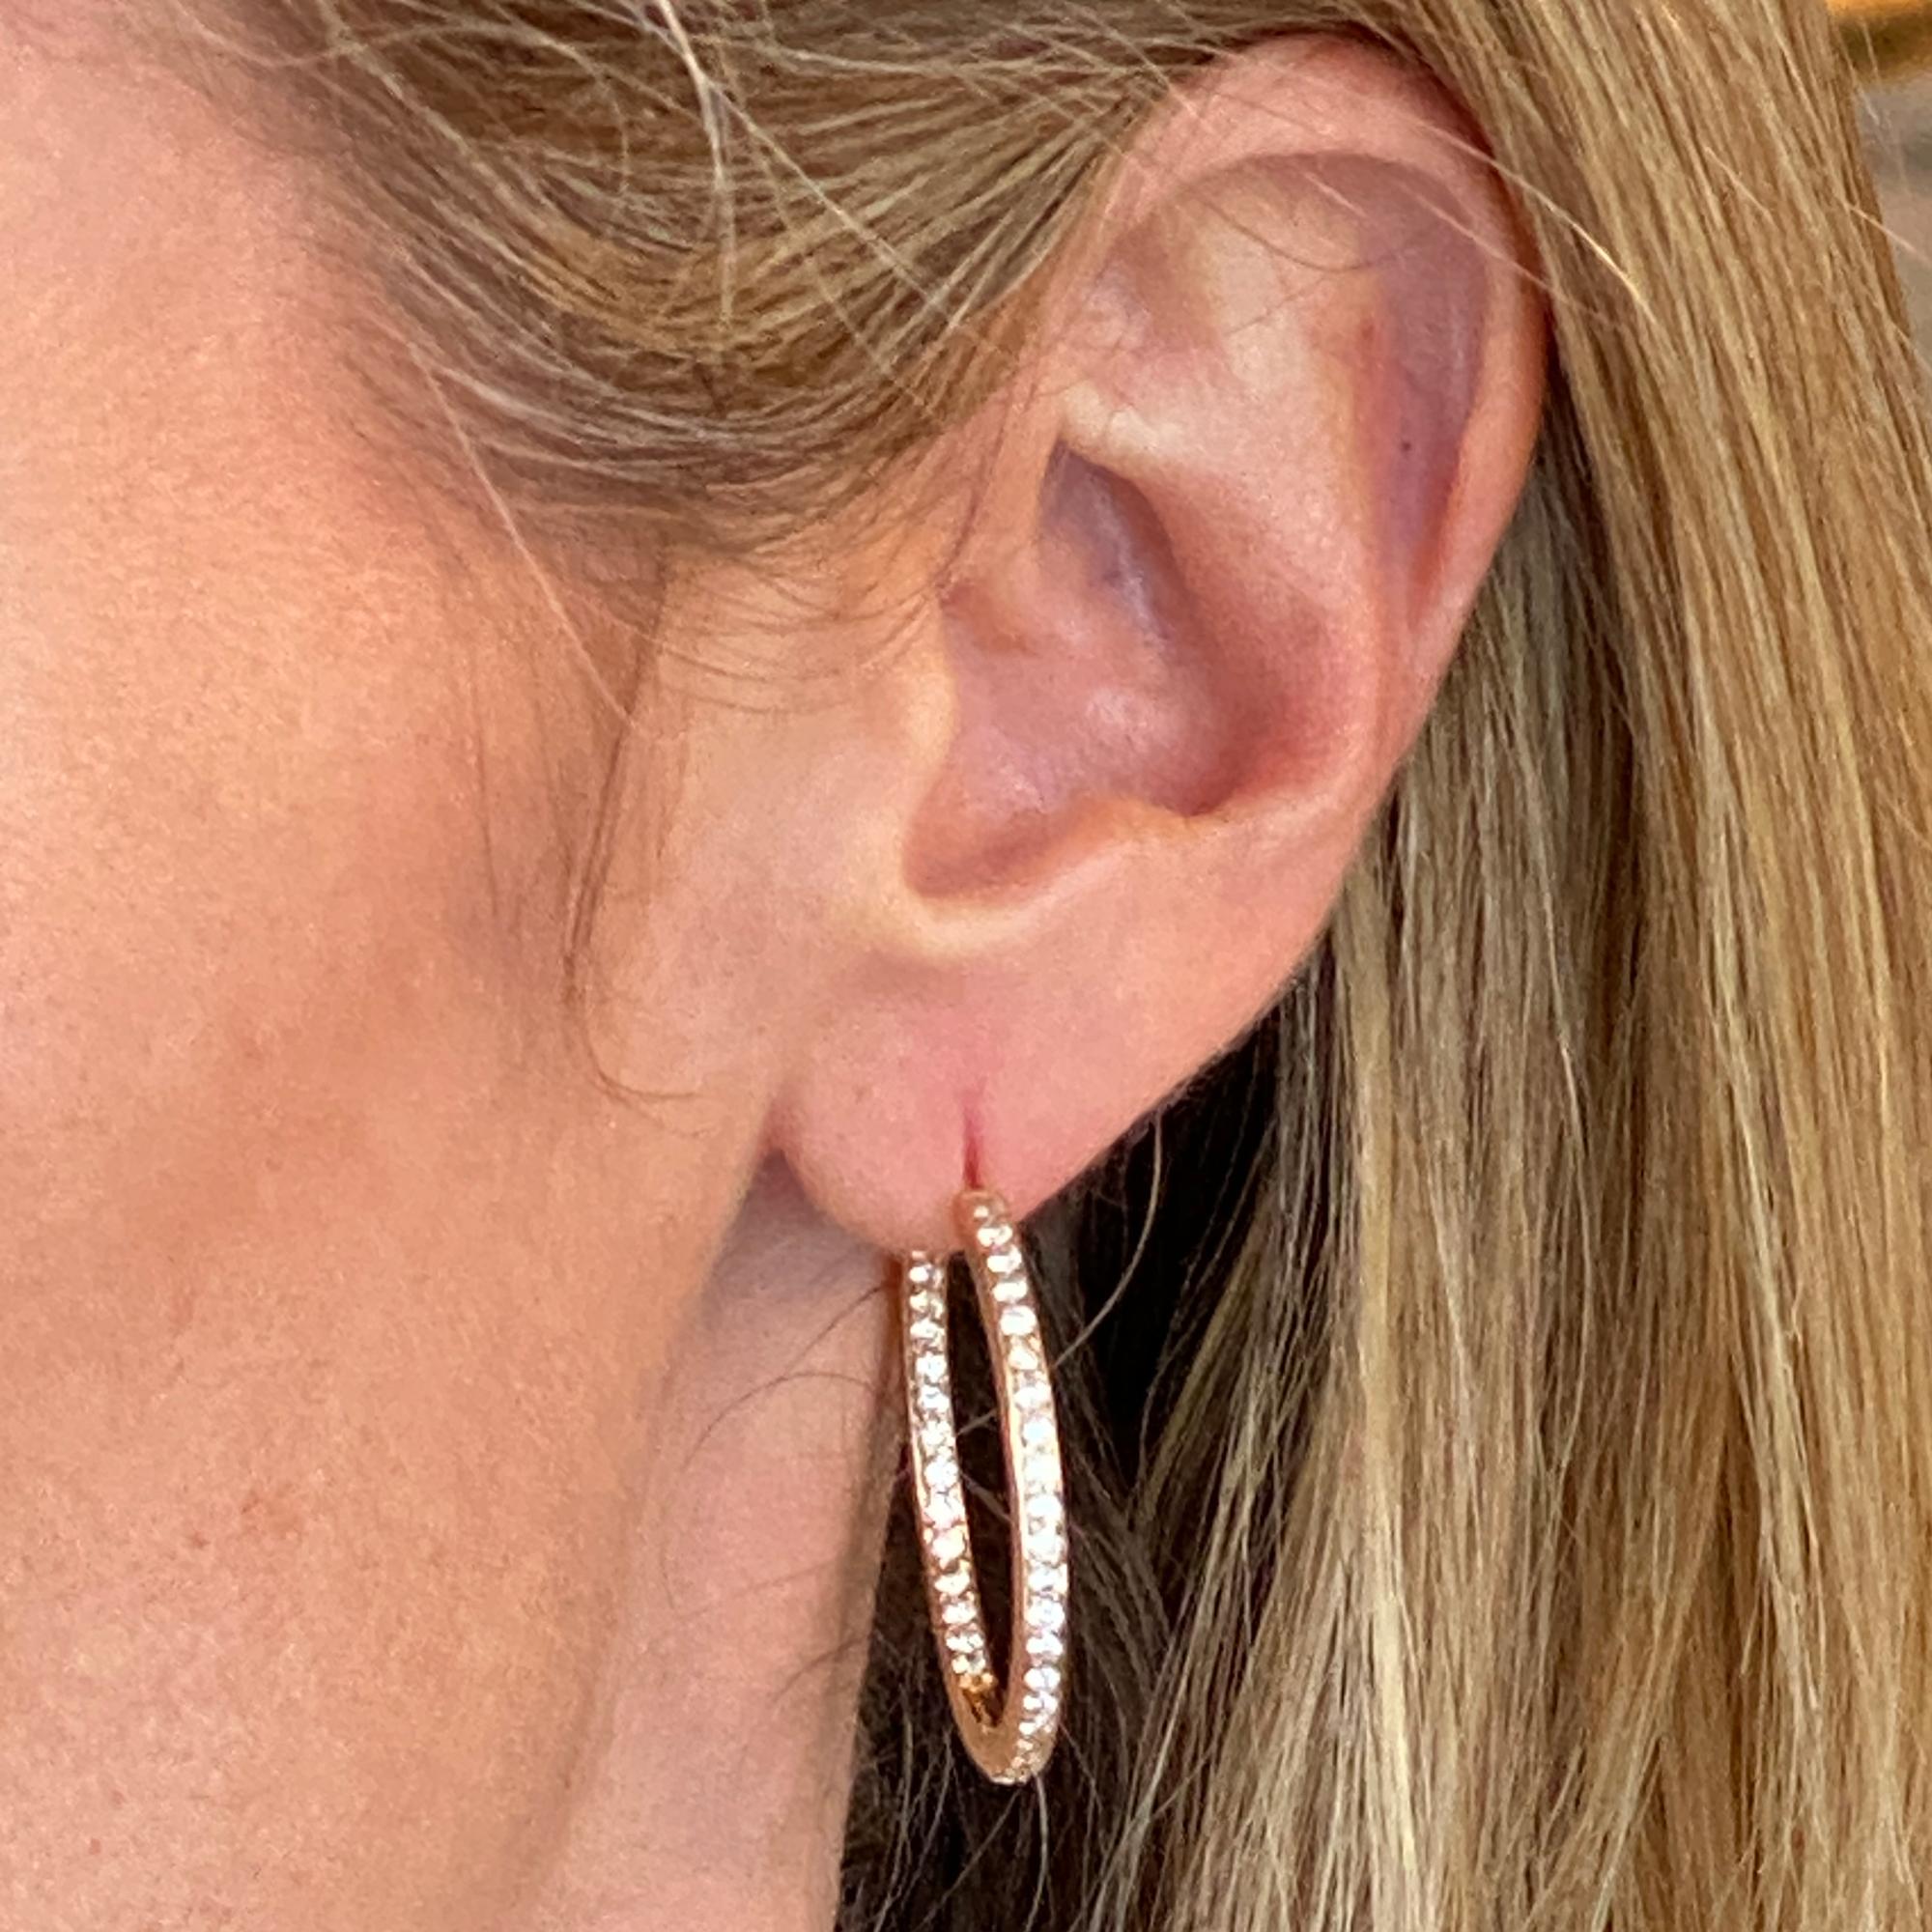 Great everyday diamond hoop earrings fashioned in 14 karat yellow gold. The earrings feature round brilliant cut diamonds weighing 1.76 carat total weight and graded G-H color and SI1 clarity. The light weight hoops measure 1.25 inches in diameter,